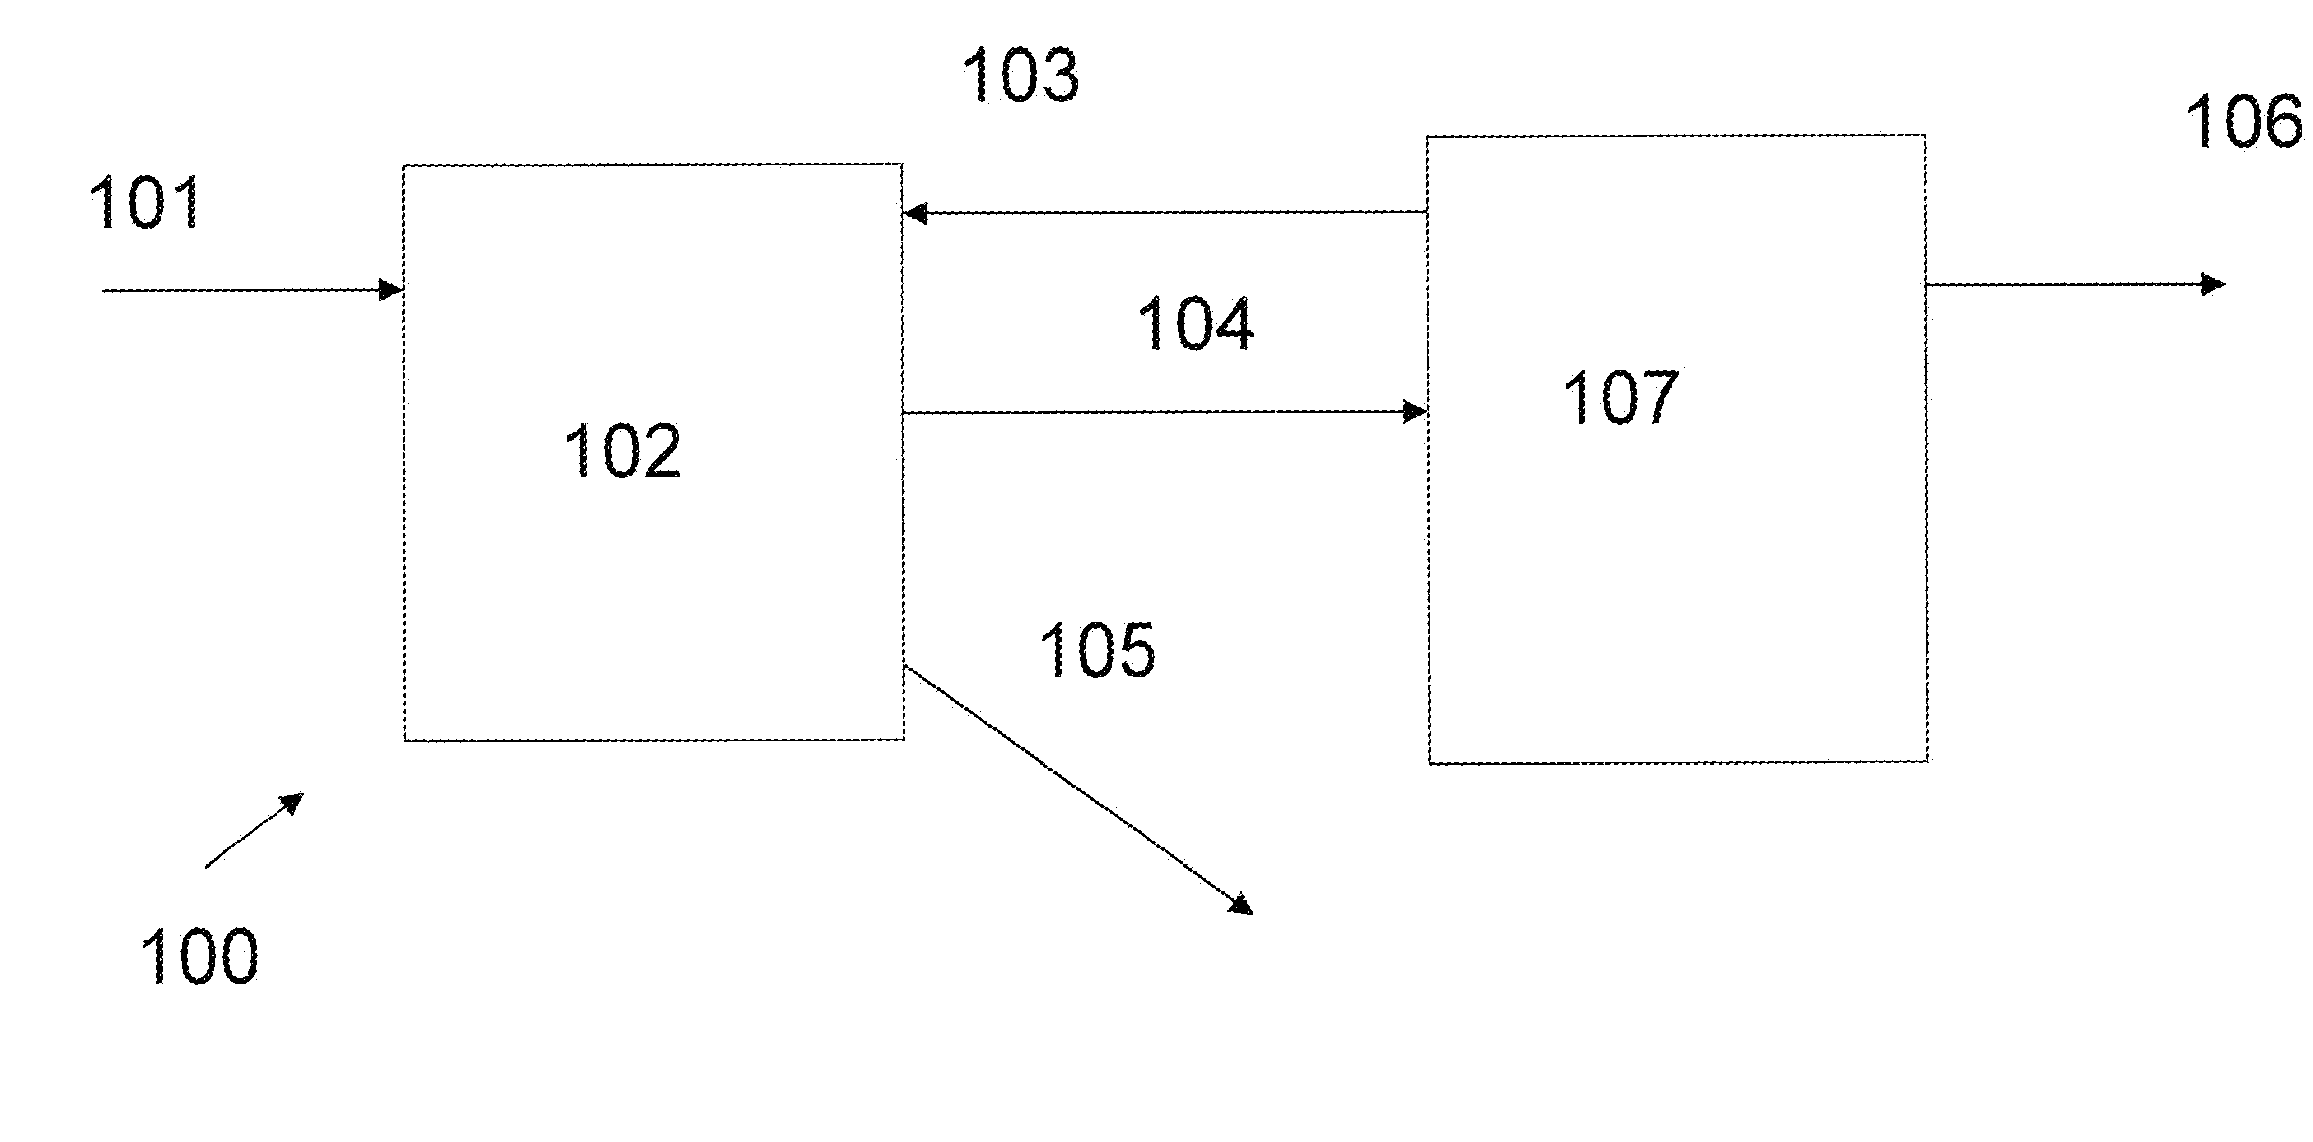 Process for generating a hydrocarbon feedstock from lignin